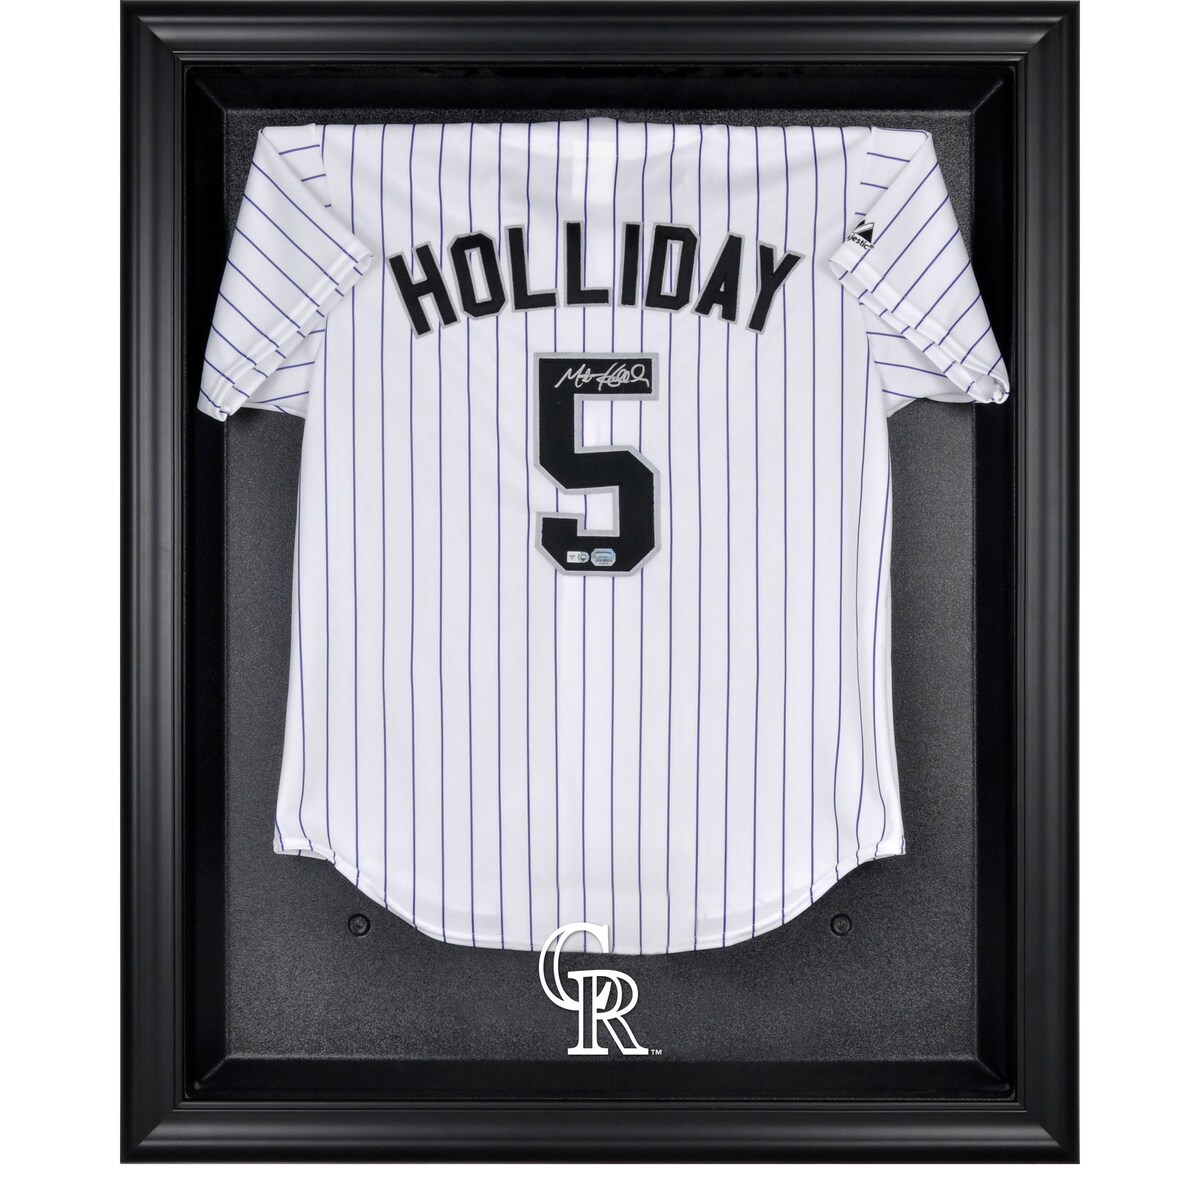 The Colorado Rockies black framed logo jersey display case opens on hinges and is easily wall-mounted. It comes with a 24'' clear acrylic rod to display a collectible jersey. This case is constructed with a durable, high-strength injection mold backing, encased by a beautiful wood frame and features an engraved team logo on the front. Officially licensed by Major League Baseball. The inner dimensions of the case are 38'' x 29 1/2''x 3'' with the outer measurements of 42'' x 34 1/2'' x 3 1/2''. Memorabilia sold separately.Officially licensedMade in the USABrand: Fanatics AuthenticMemorabilia sold separately